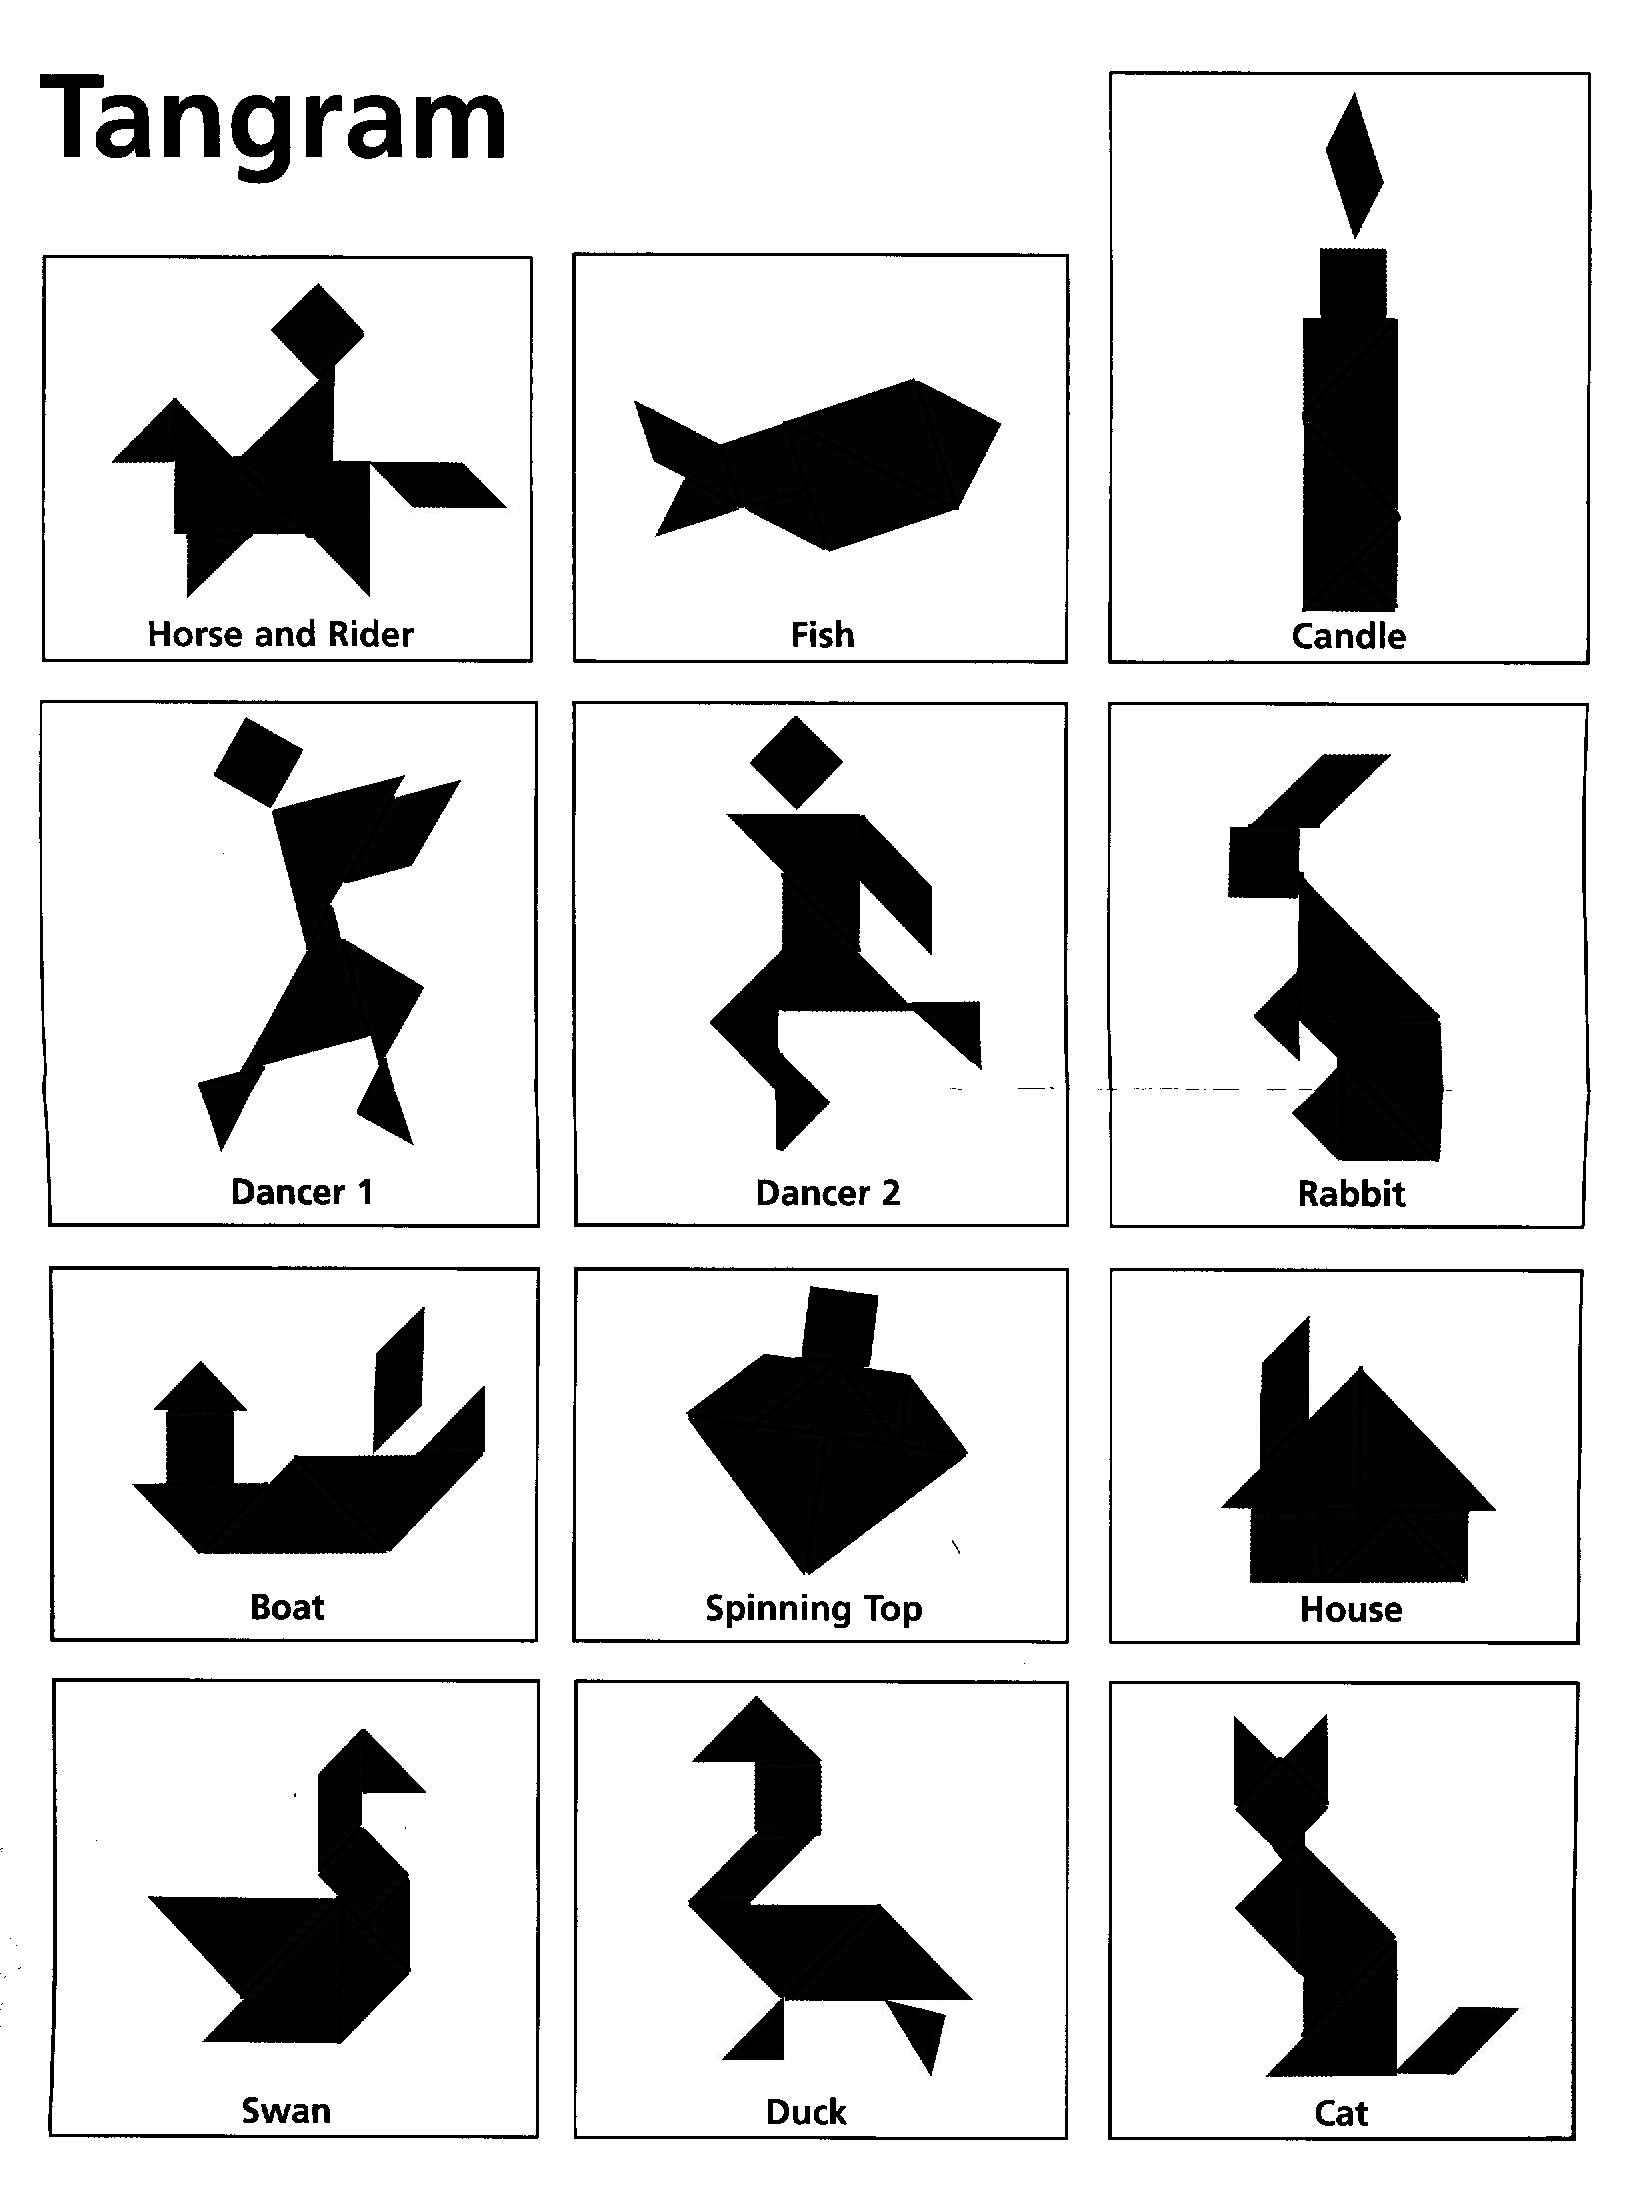 Tangram Outline Solutions Png &amp;amp; Free Tangram Outline Solutions - Printable Tangram Puzzle Outlines